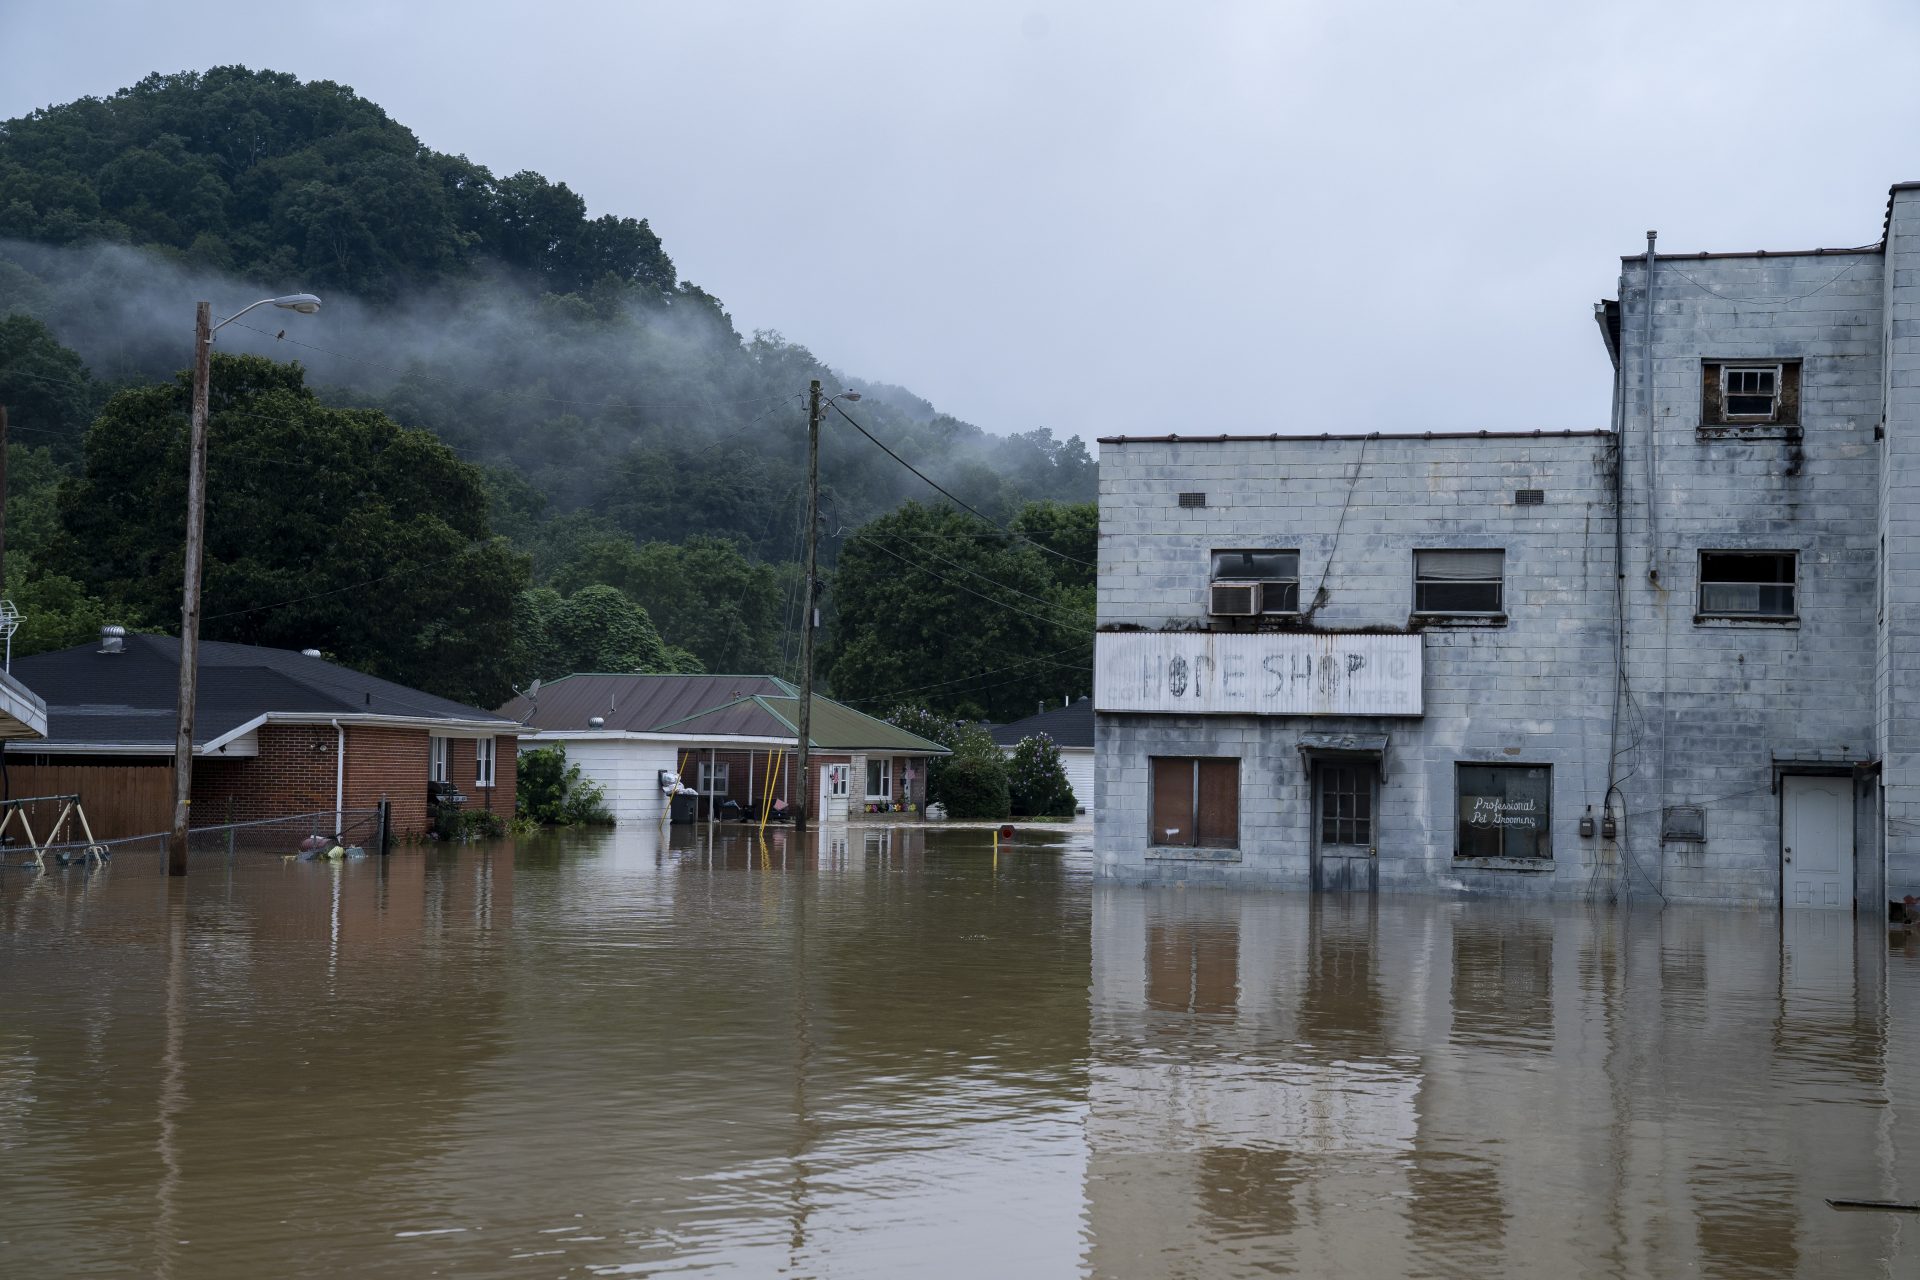 President Joe Biden Issues Major Disaster Declaration For Kentucky After Flooding Resulted In At Least 16 Deaths thumbnail